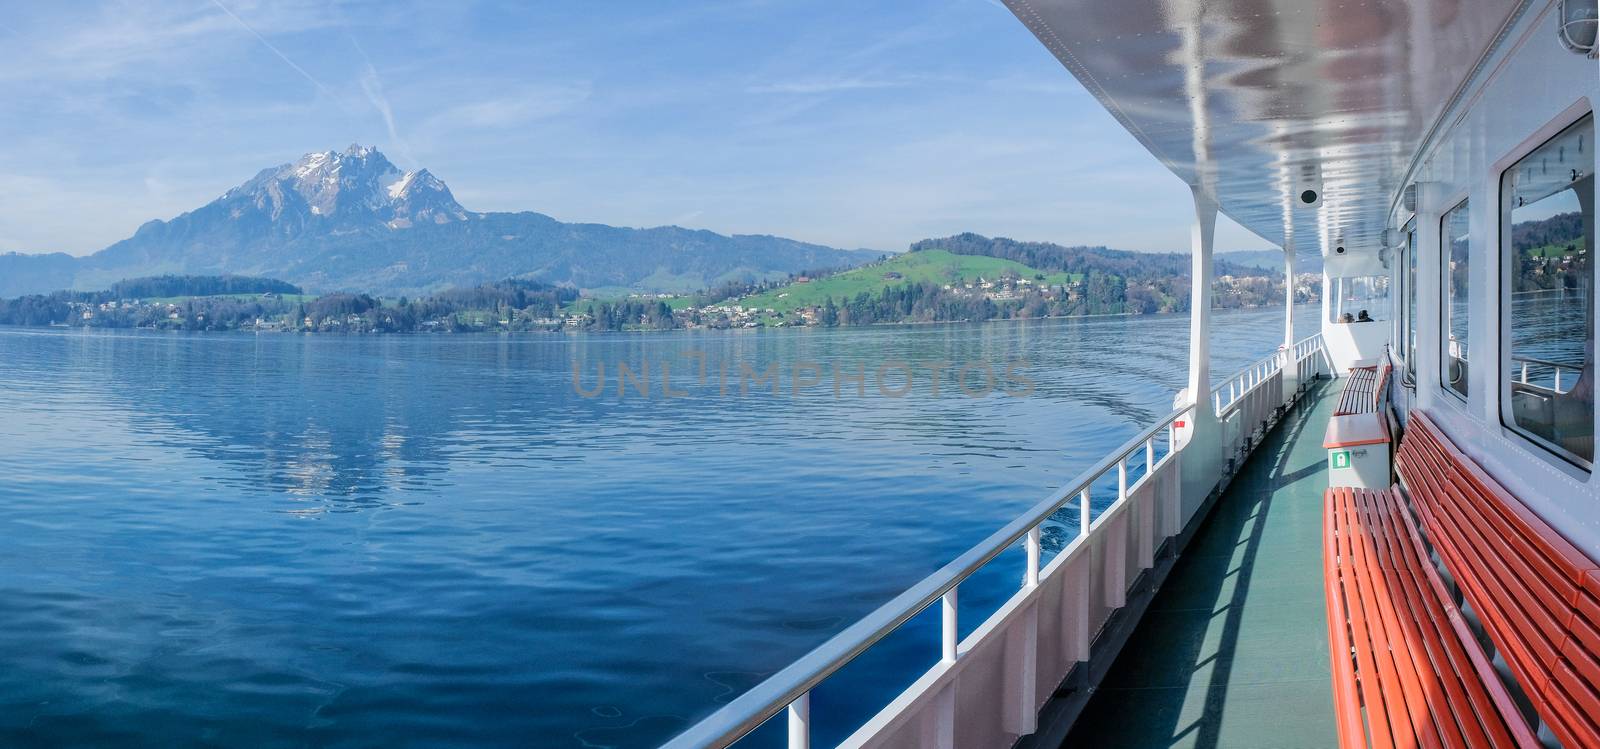 The outside deck of a ferry on lake Lucerne
